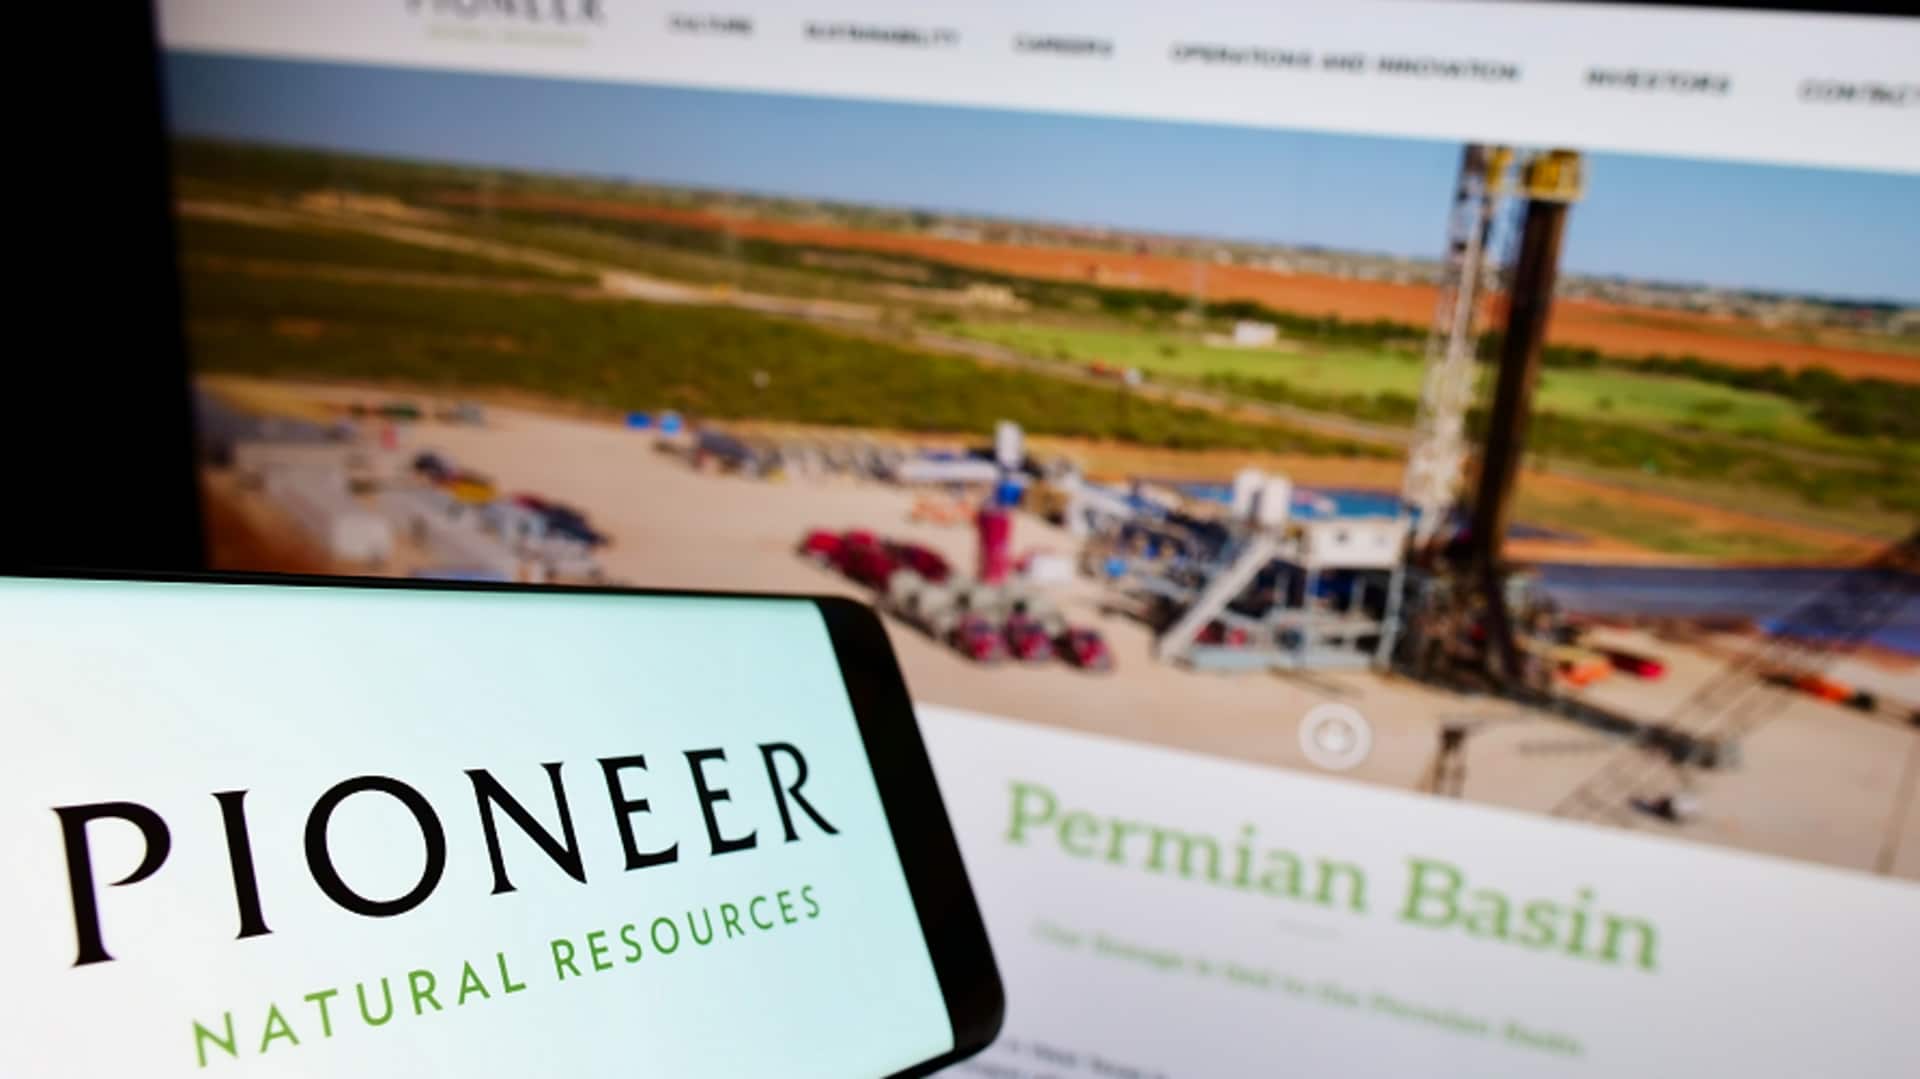 Exxon Mobil buys Pioneer Natural Resources for $60 billion